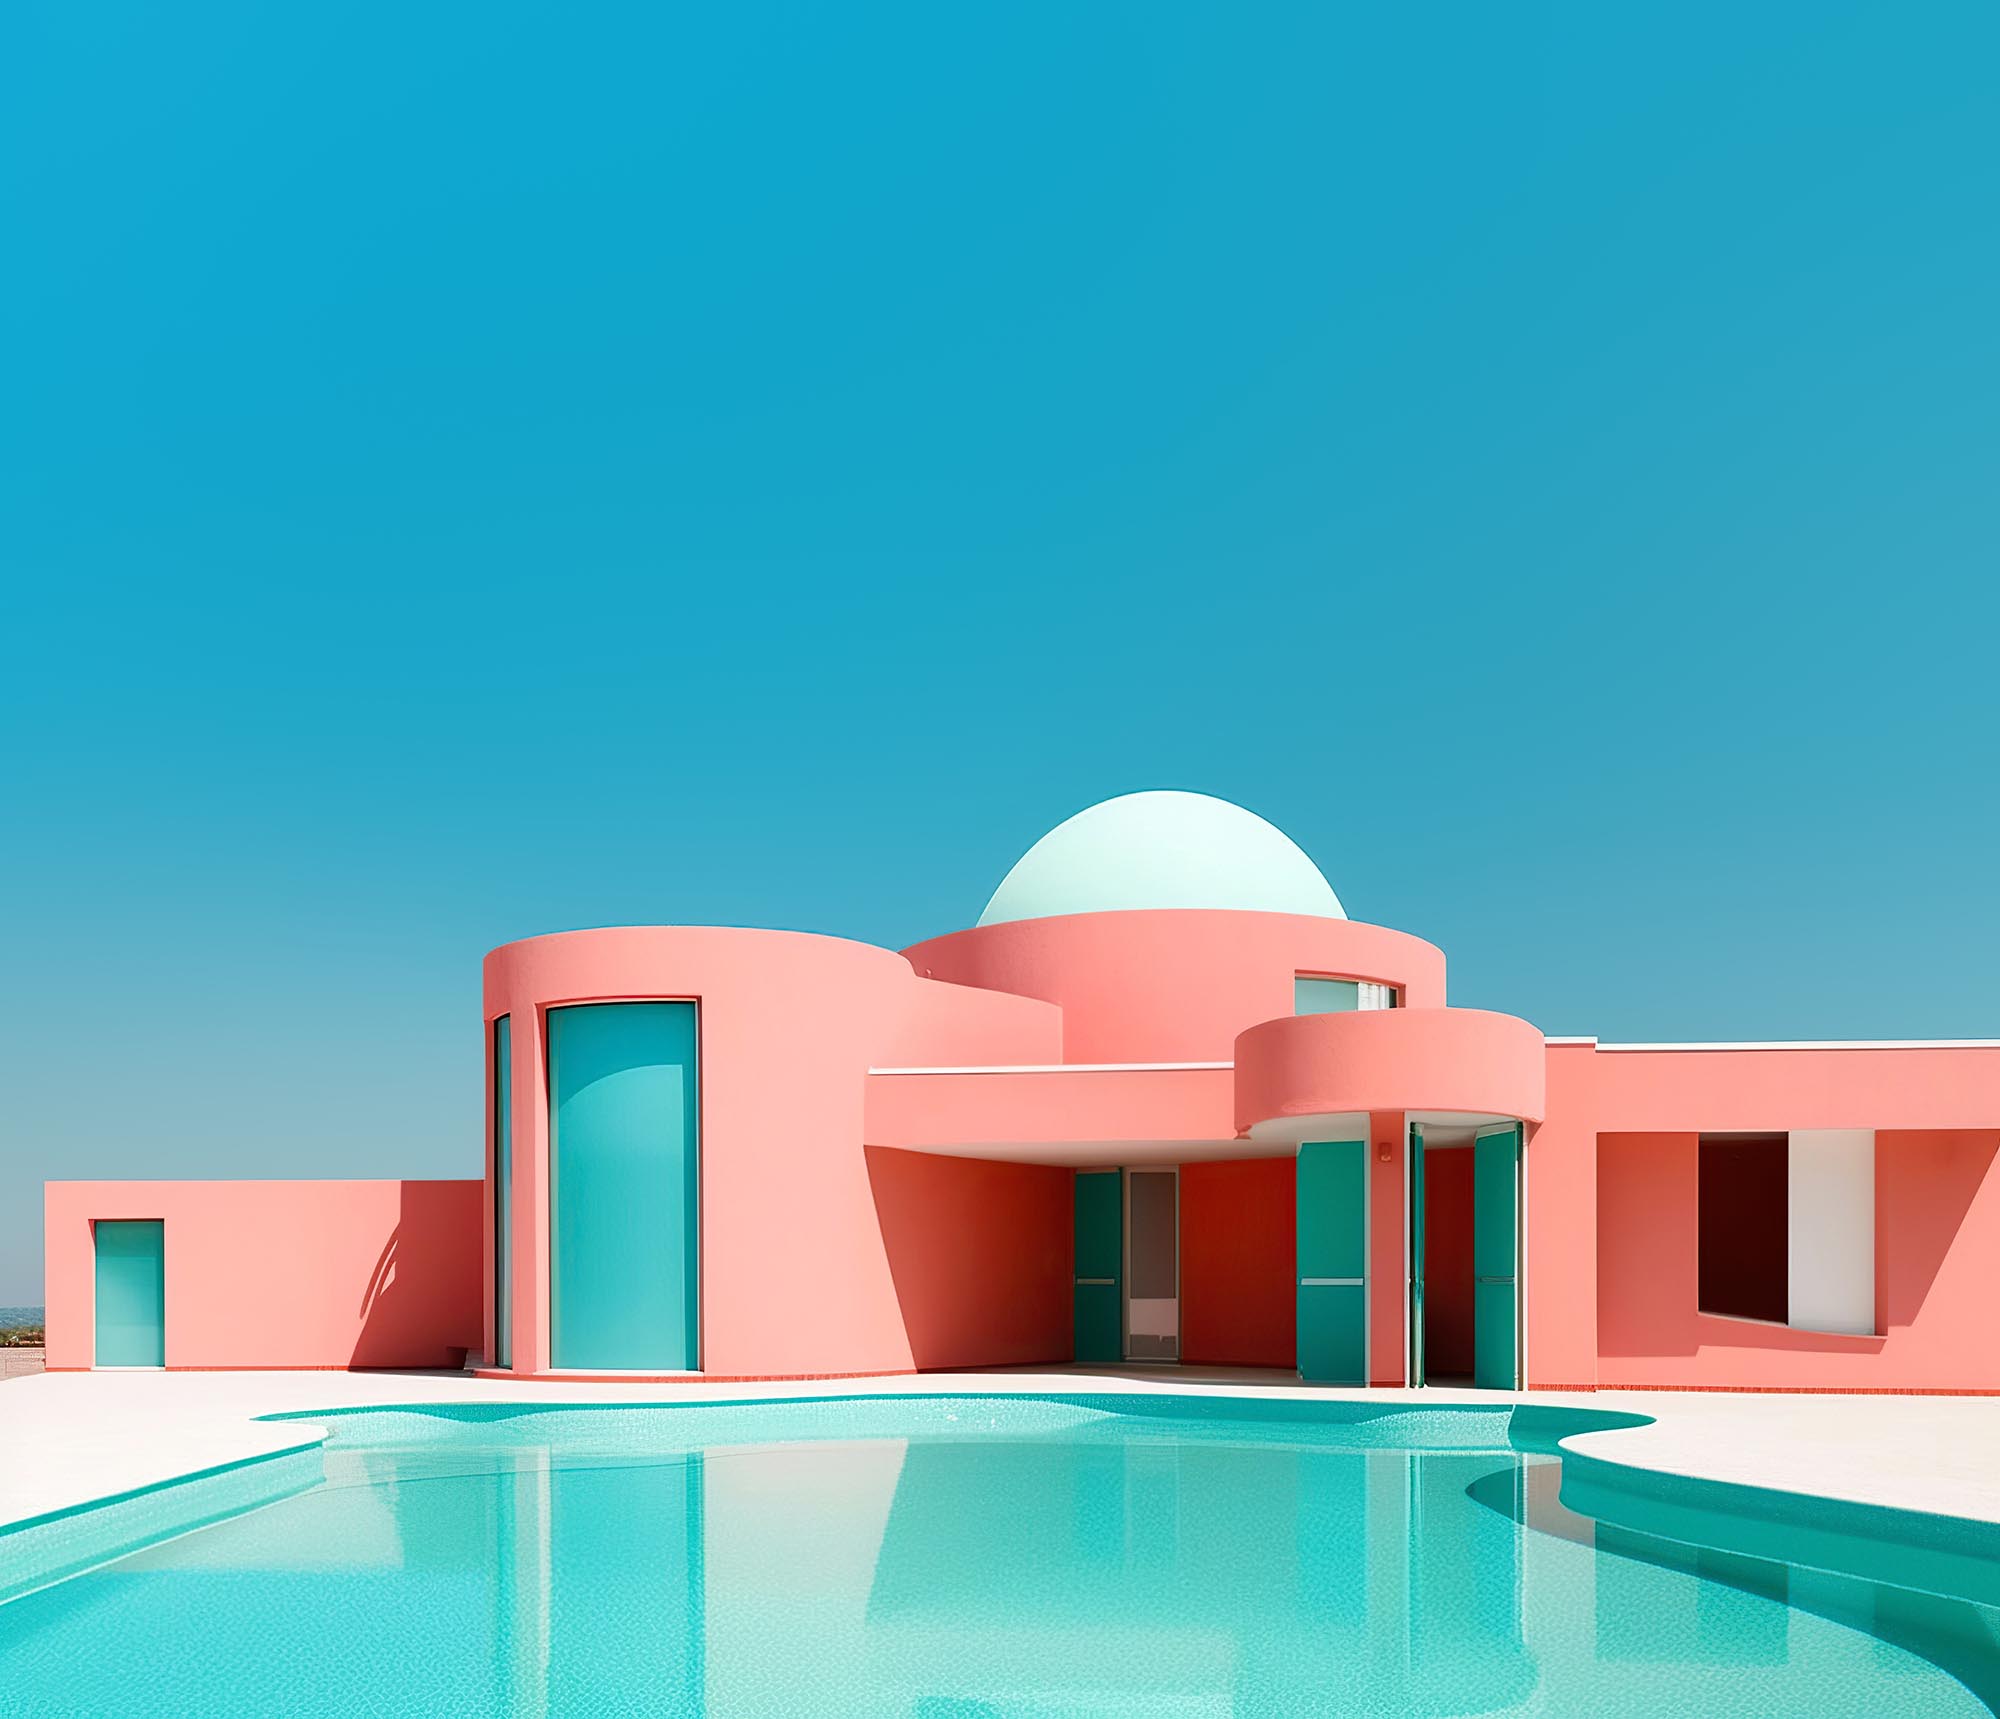 Swimming pool on sunny day. Summer minimalist architecture background.